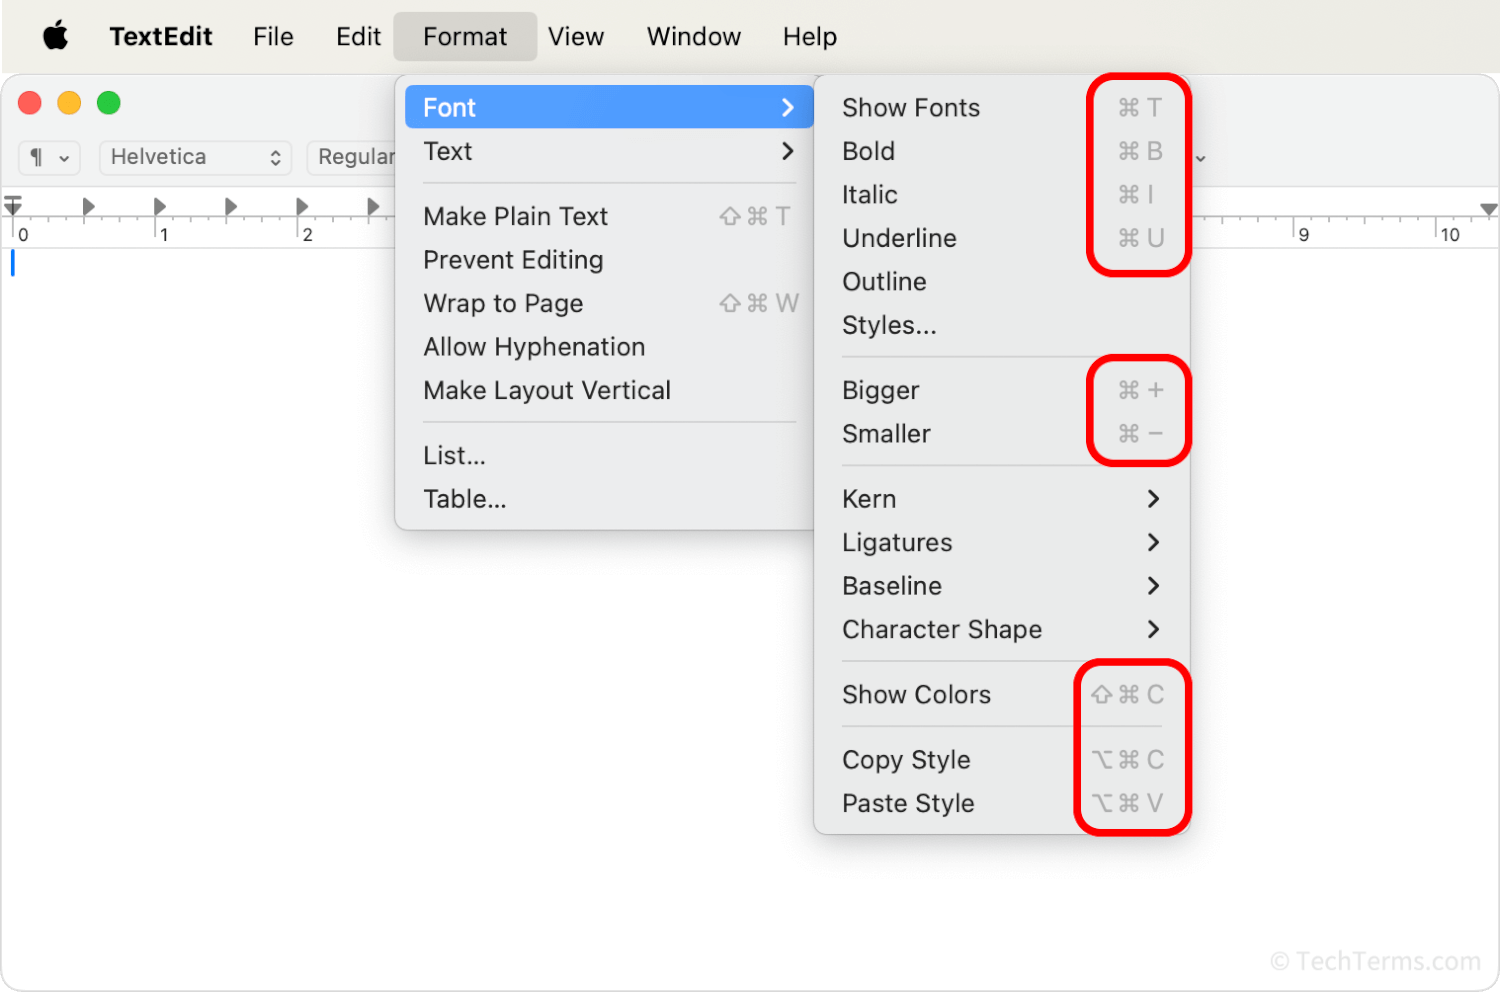 Several keyboard shortcuts for commands in the TextEdit Font menu